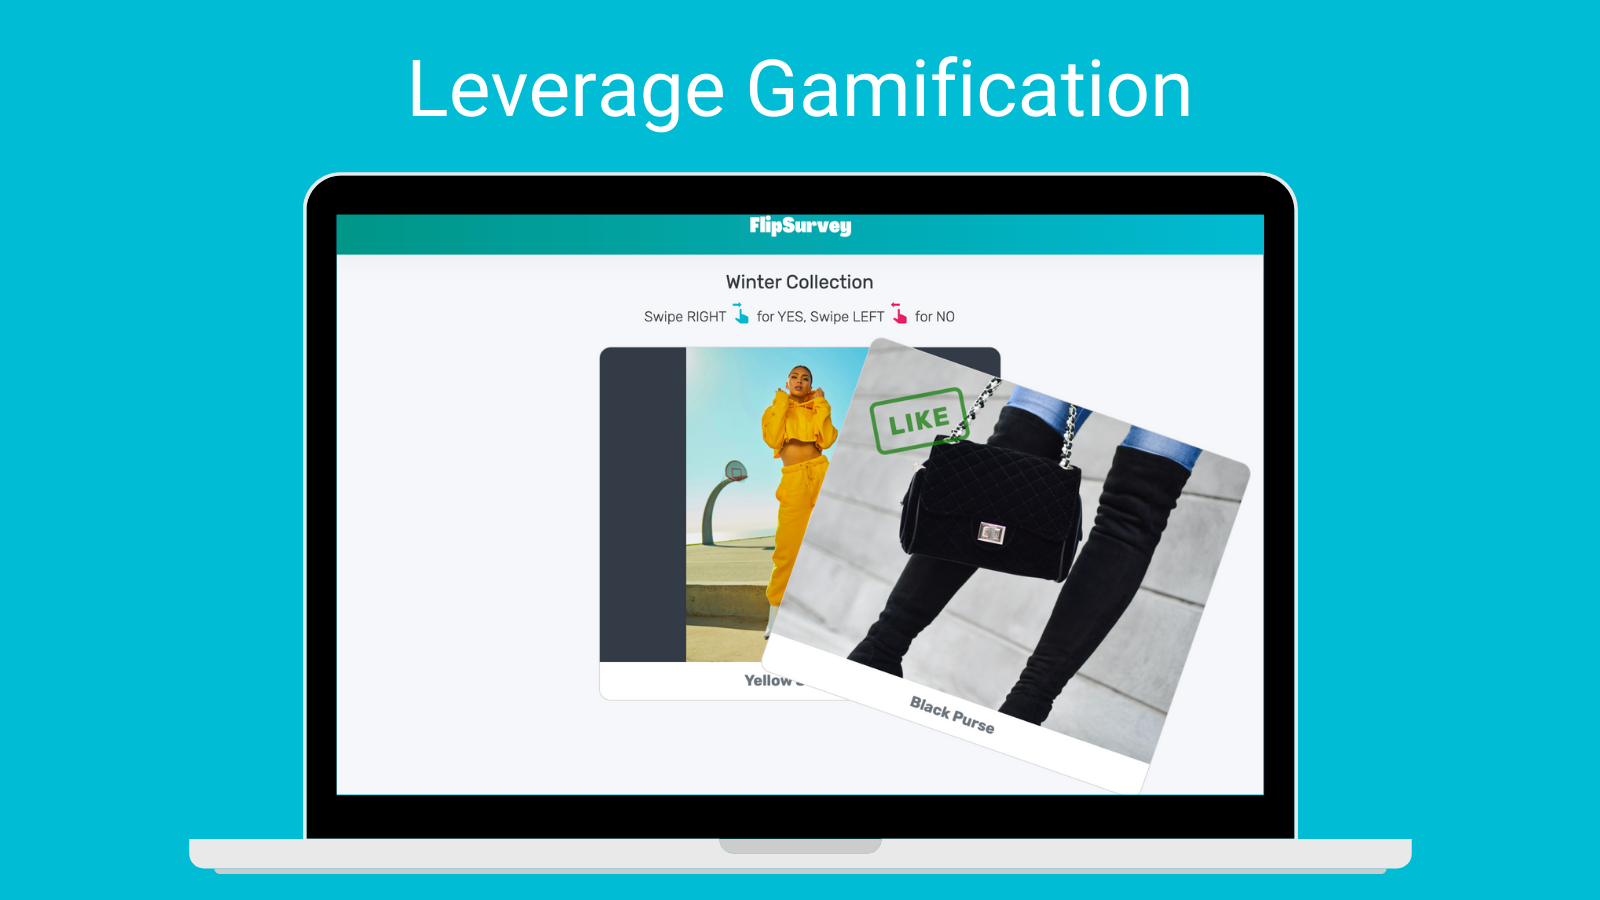 Leverage Gamification